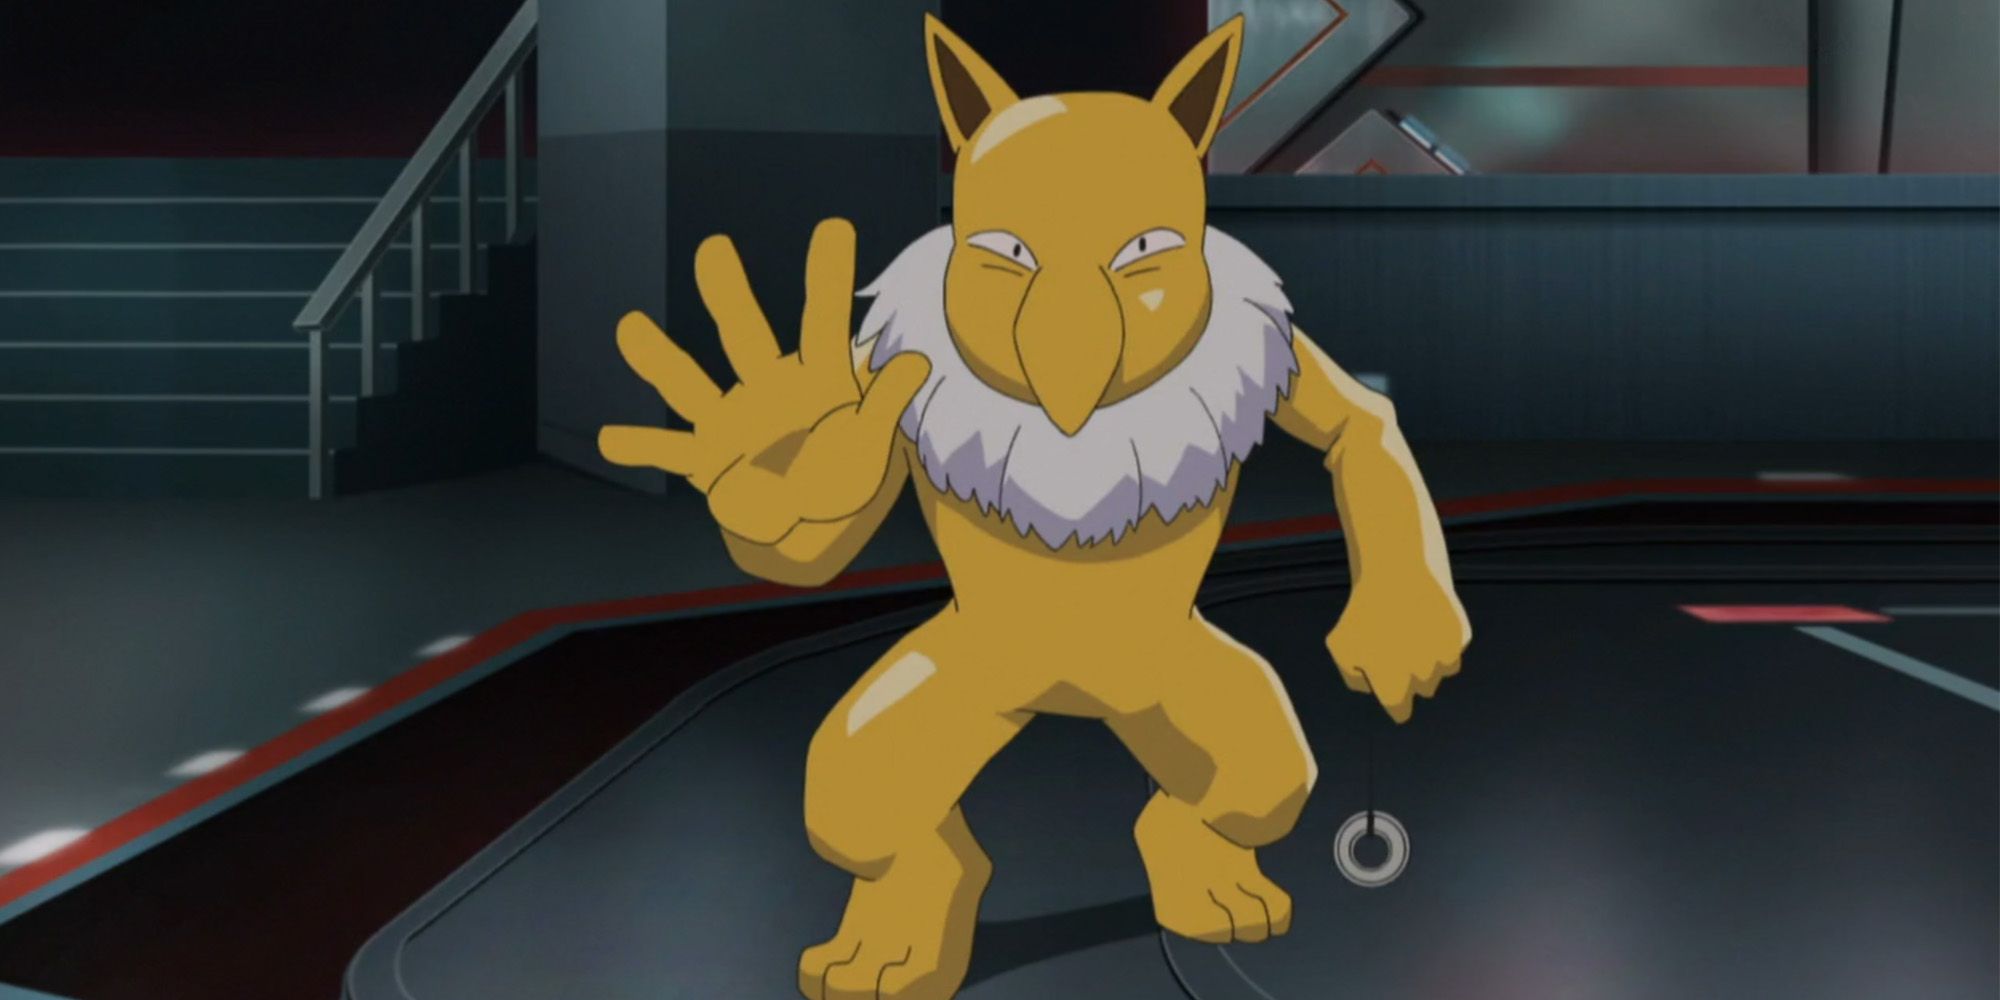 Hypno as depicted by the Pokémon anime series